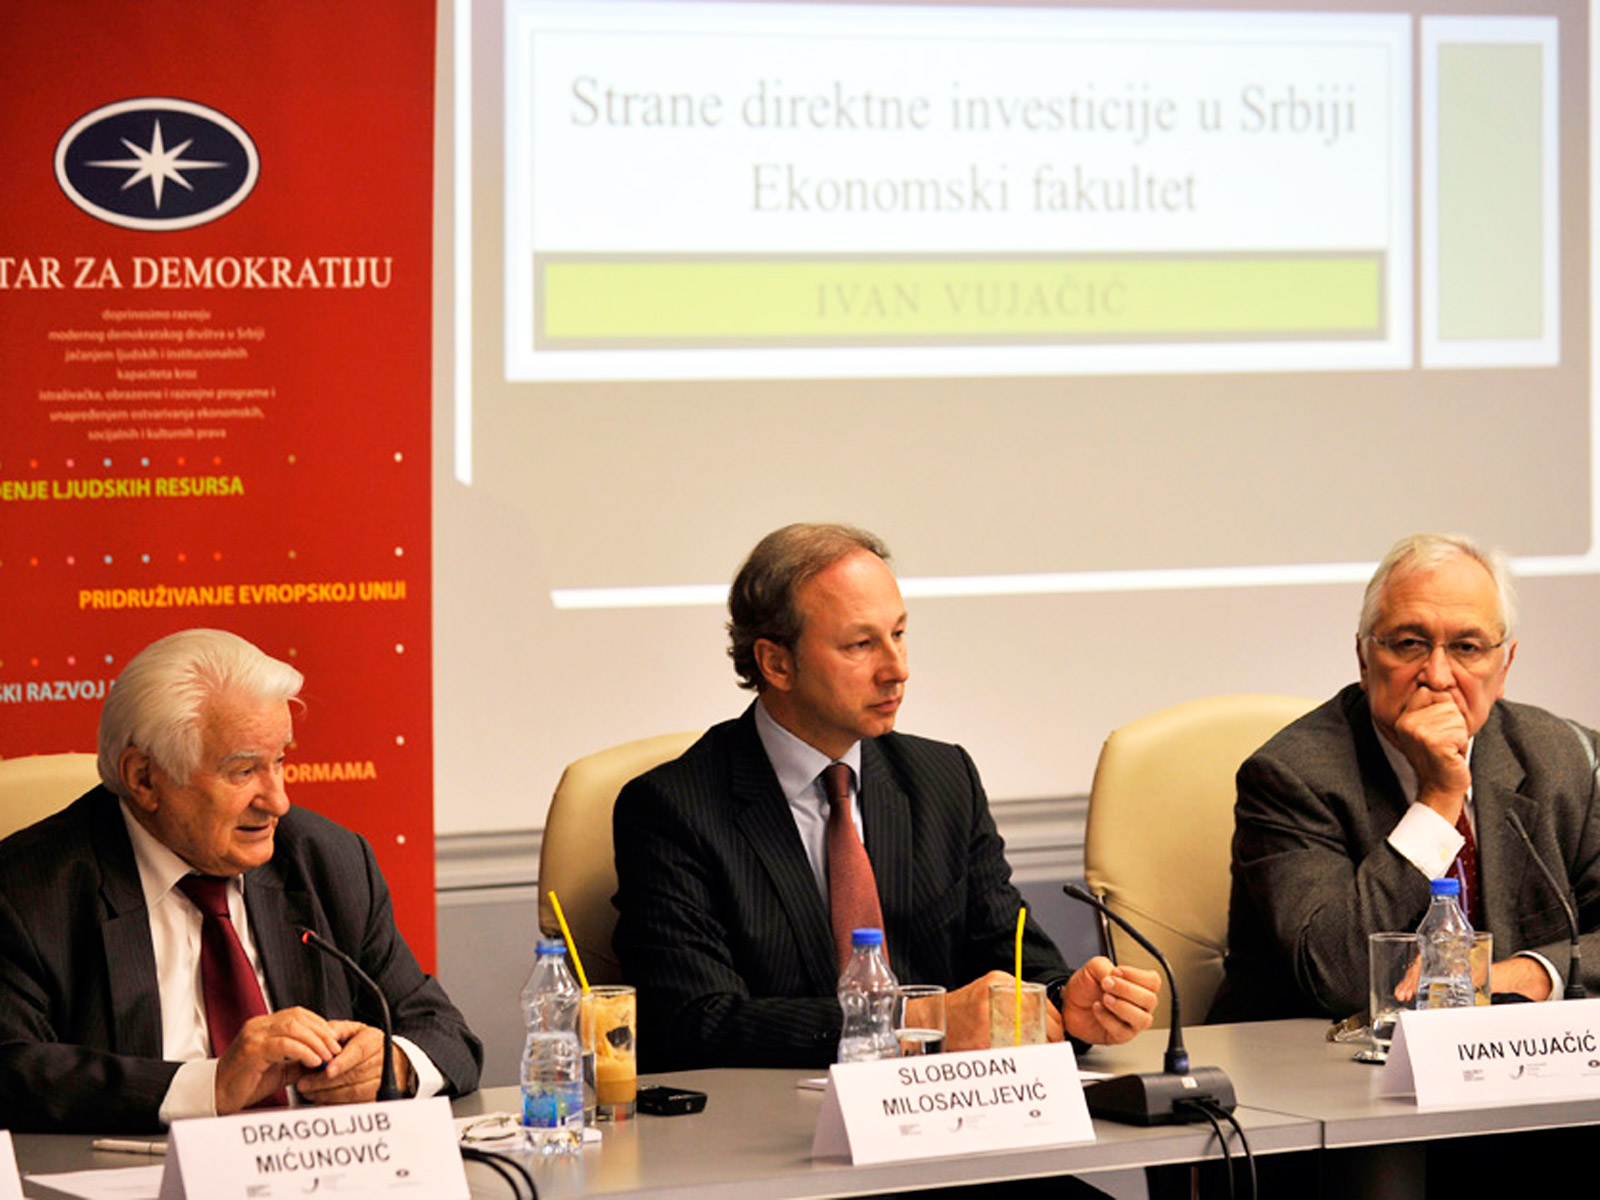 Democratic Political Forum Debate: How to Recover the Economy of Serbia?